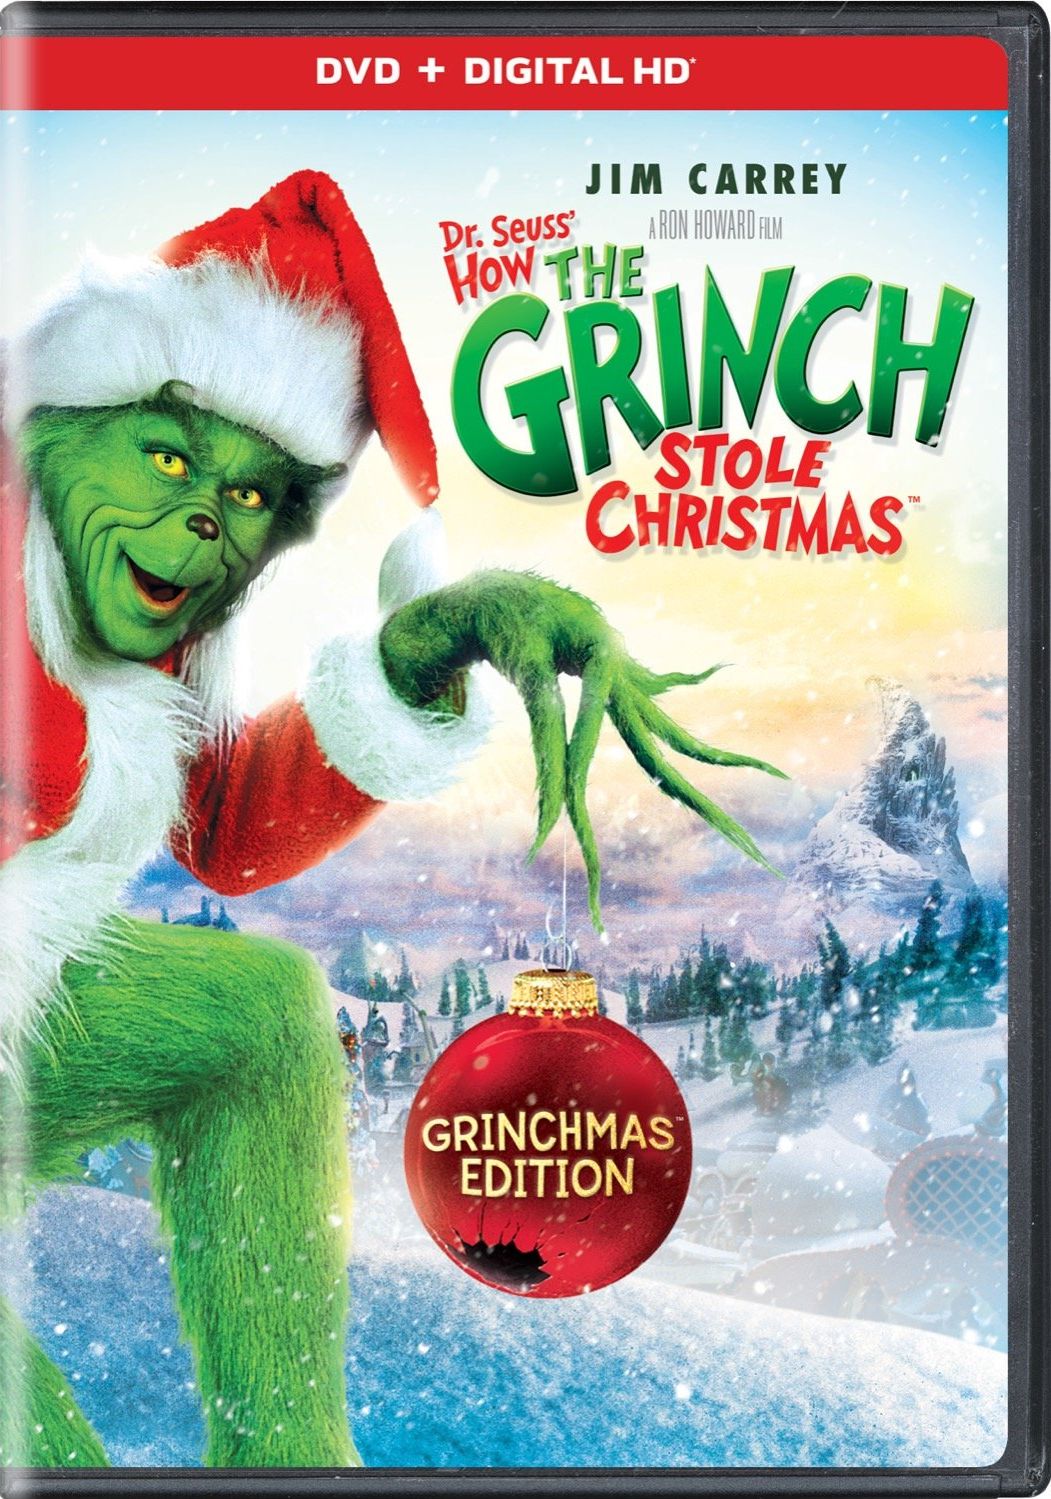 How the Grinch Stole Christmas DVD Release Date October 7, 2003